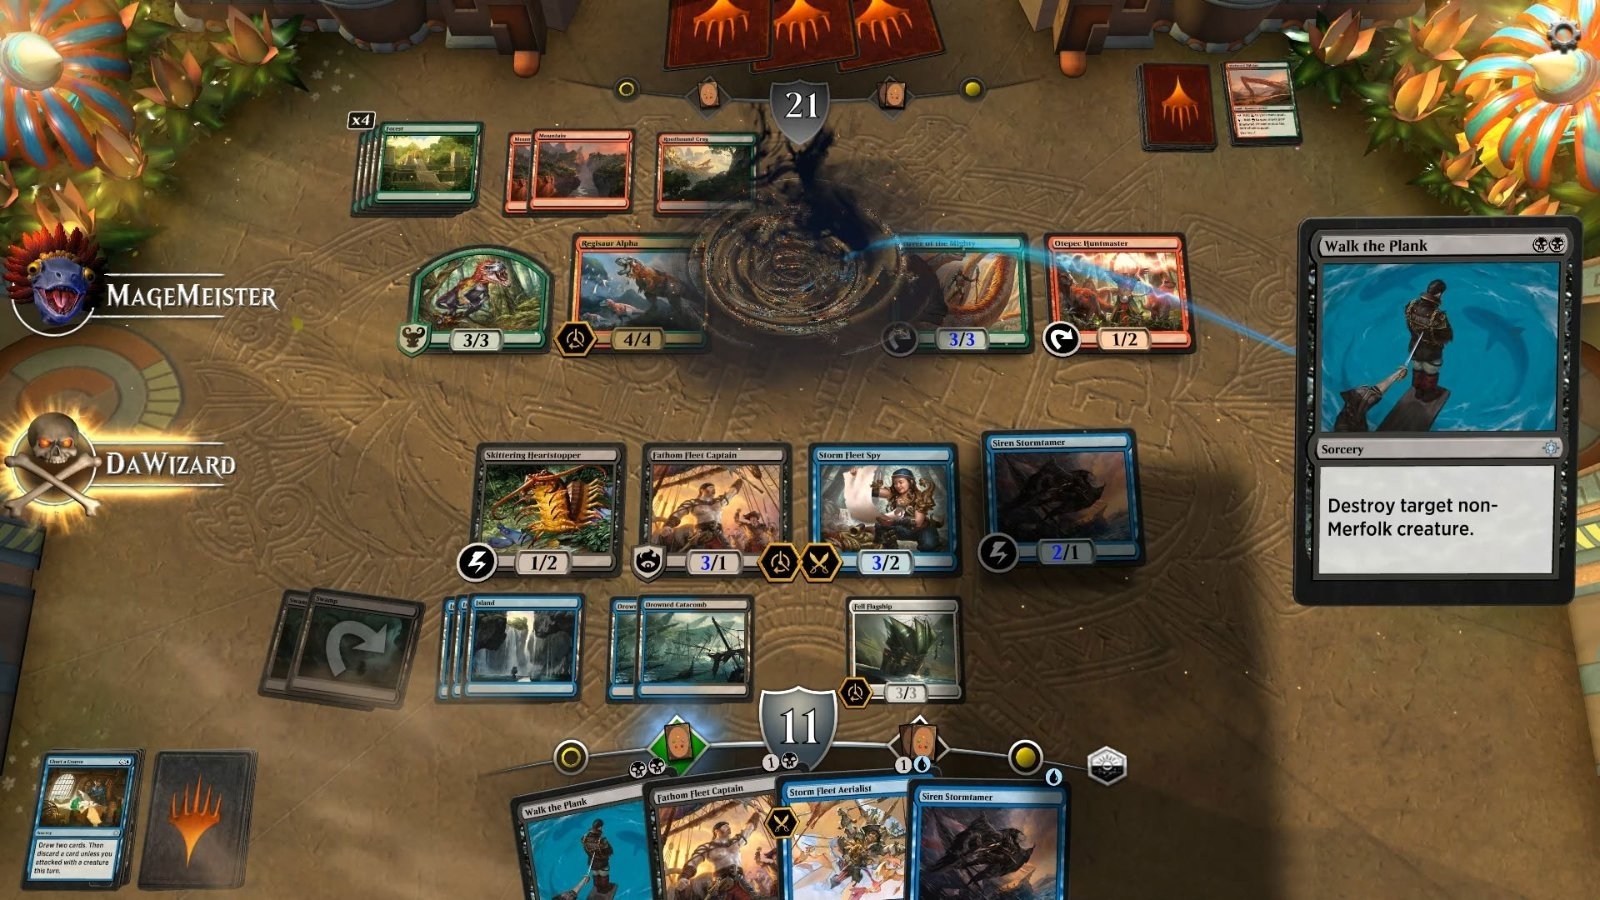 Magic: The Gathering Arena in action